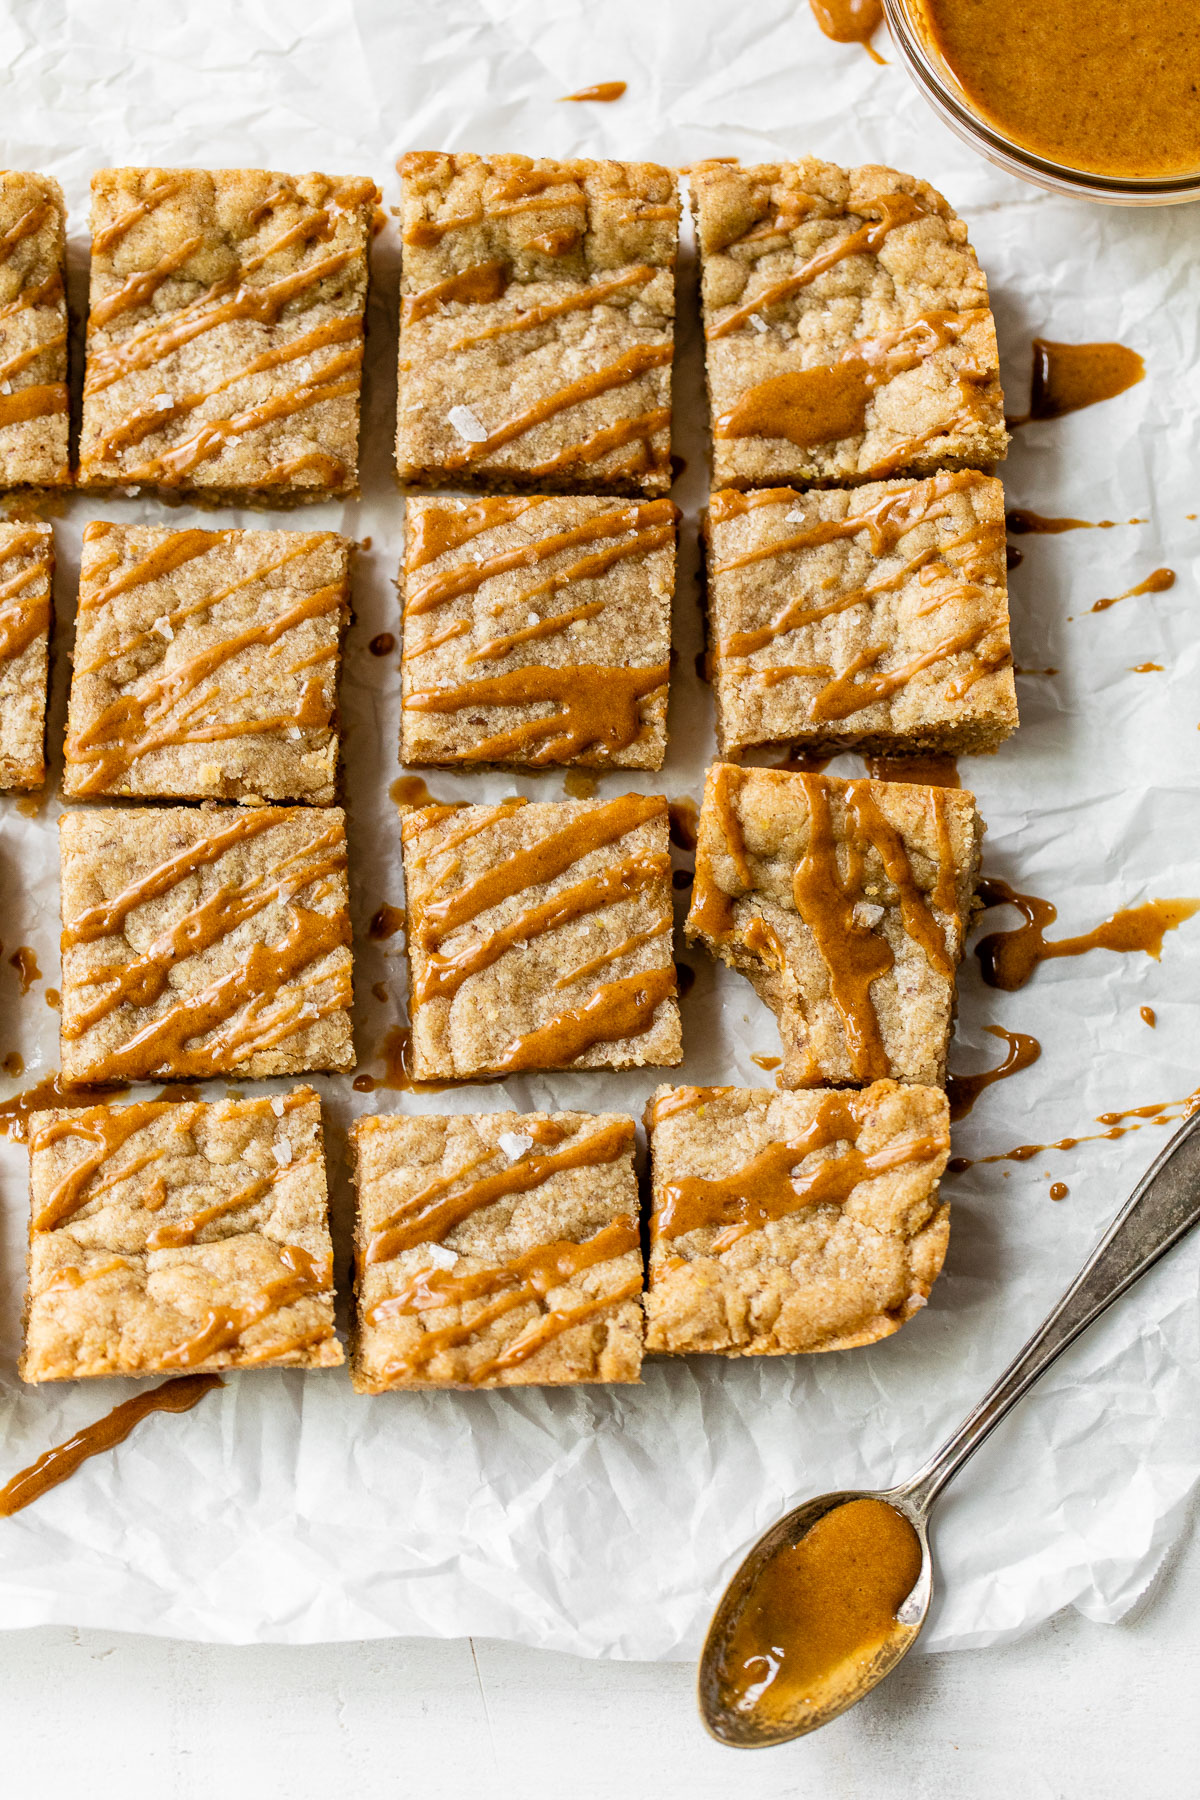 blondies on parchment paper with a caramel-colored drizzle over top